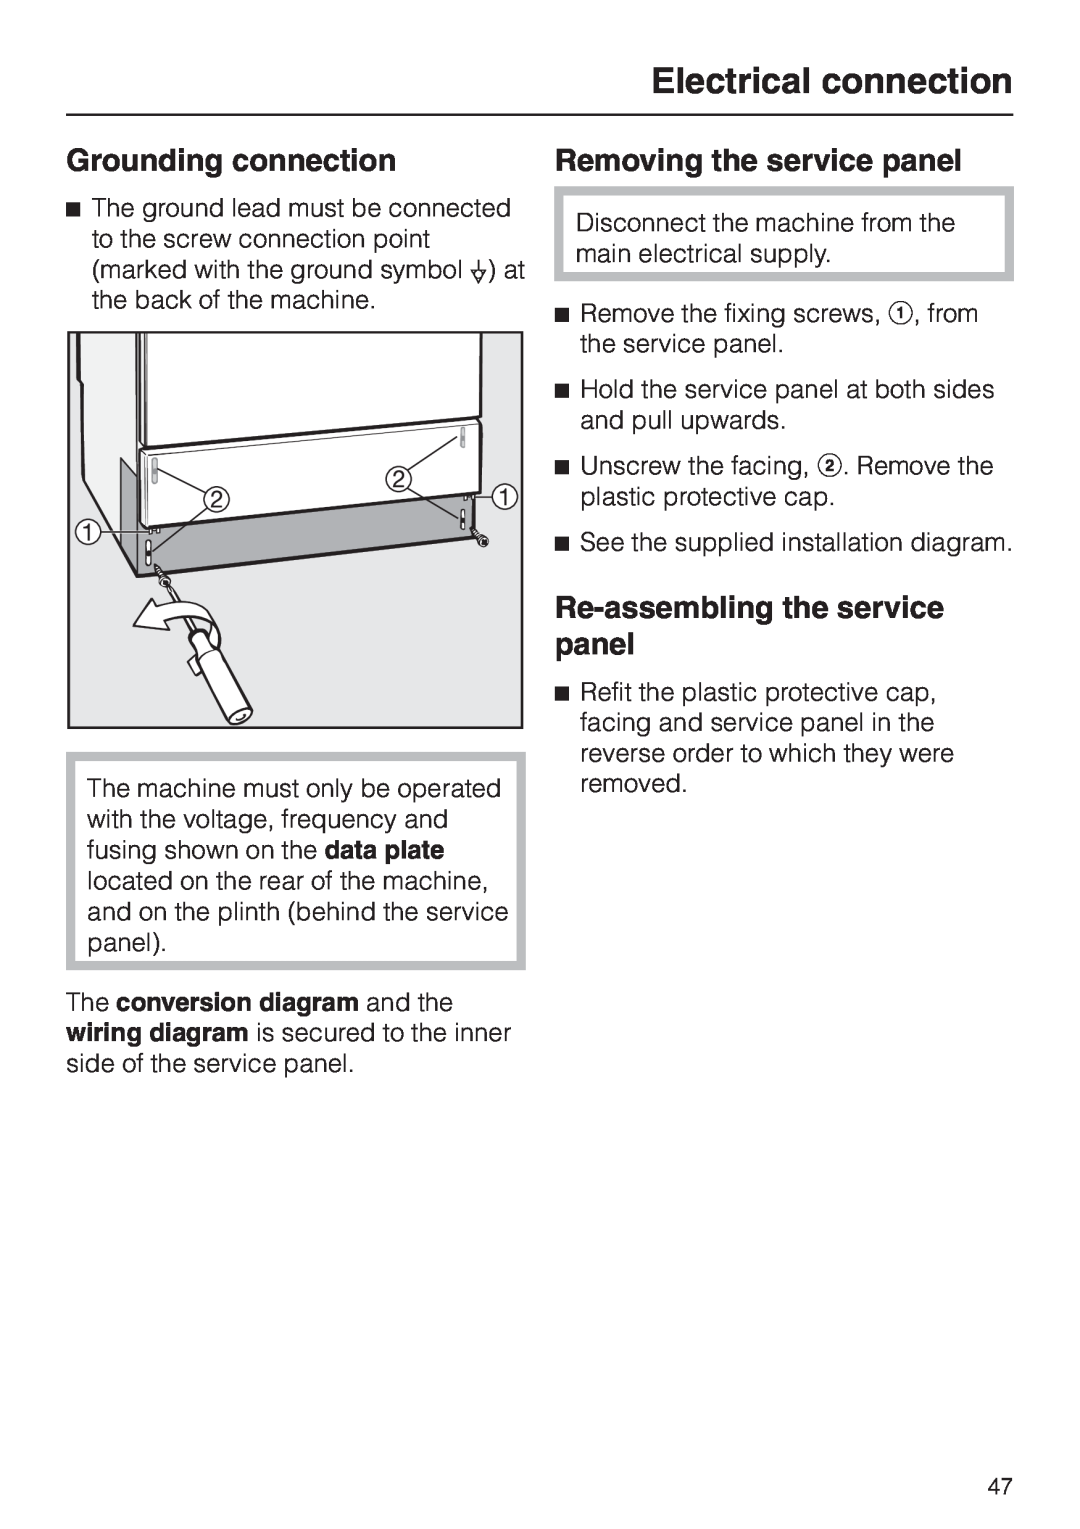 Miele G 7804 Grounding connection, Removing the service panel, Re-assemblingthe service panel, Electrical connection 